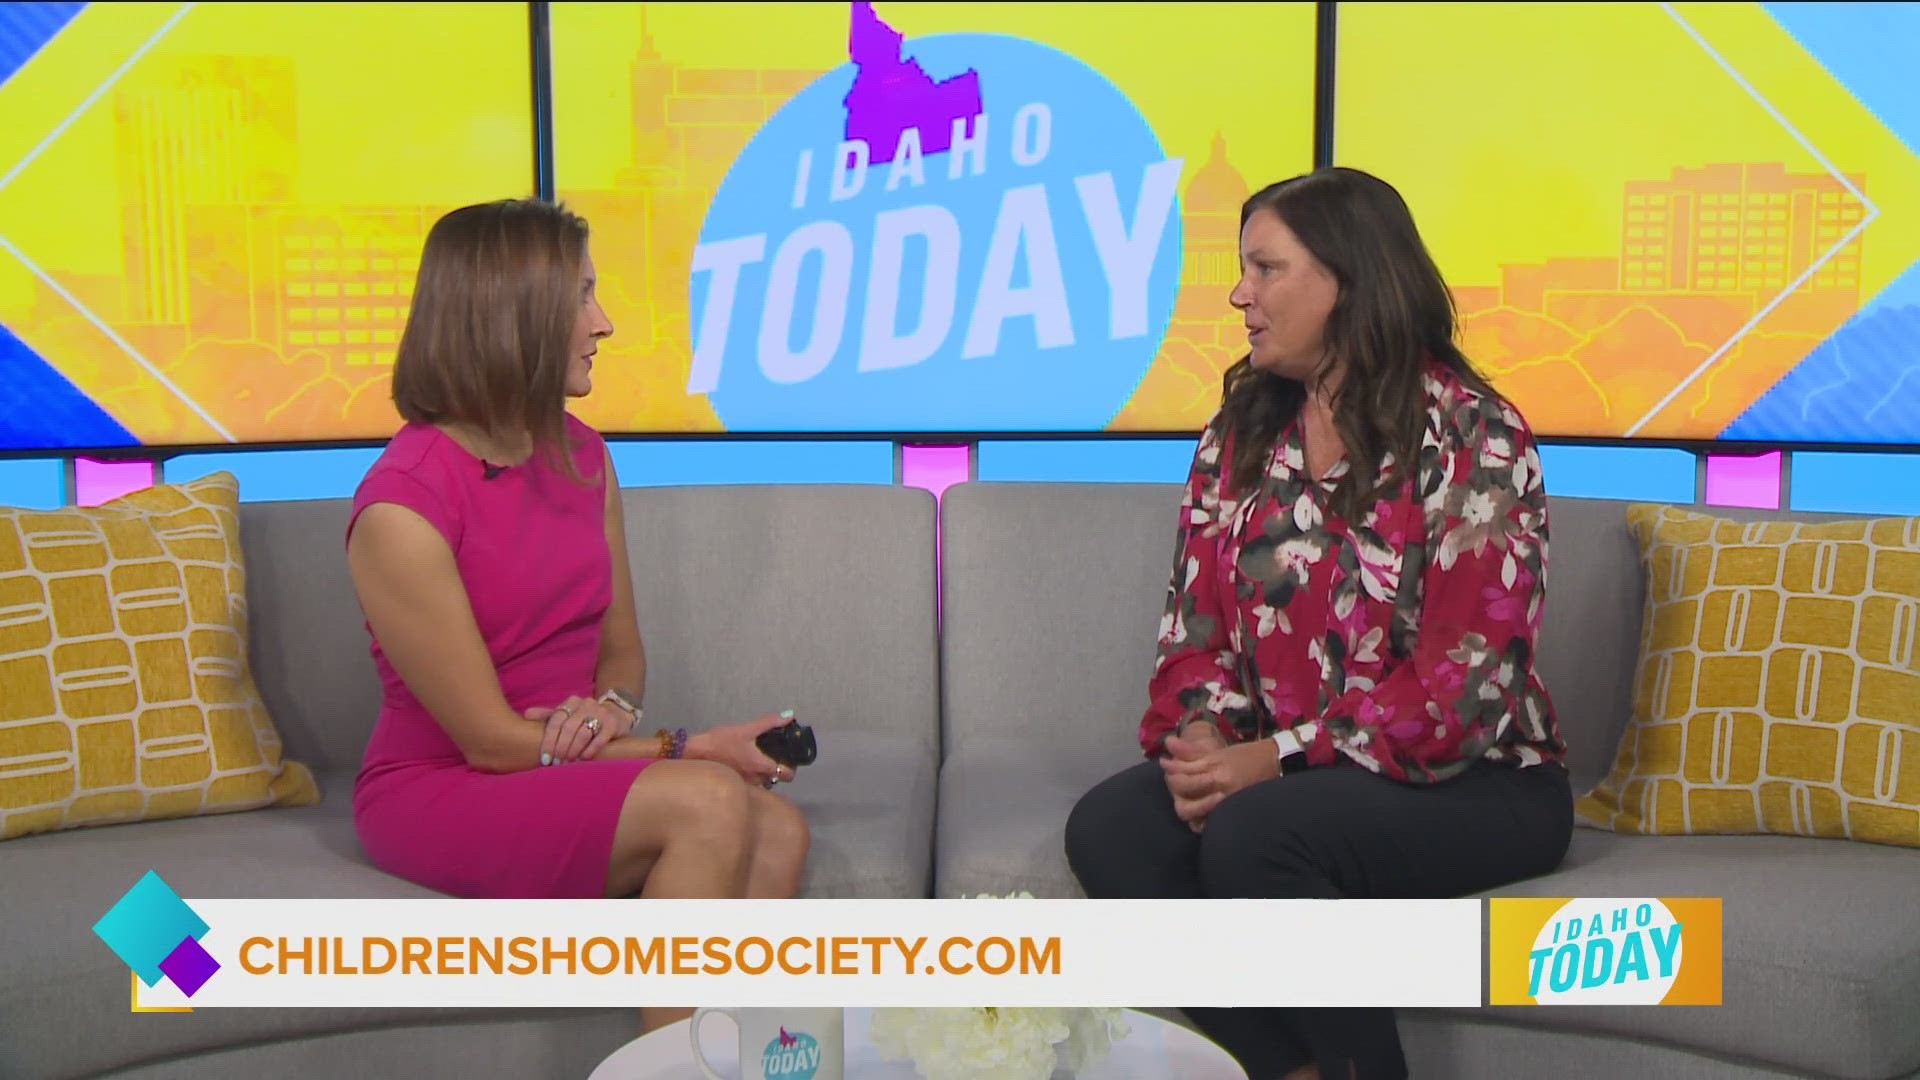 Idaho Today’s Mellisa Paul gets the details on the Children’s Home of Idaho event for kids managing anxiety. Kristin Armstrong will be in attendance.